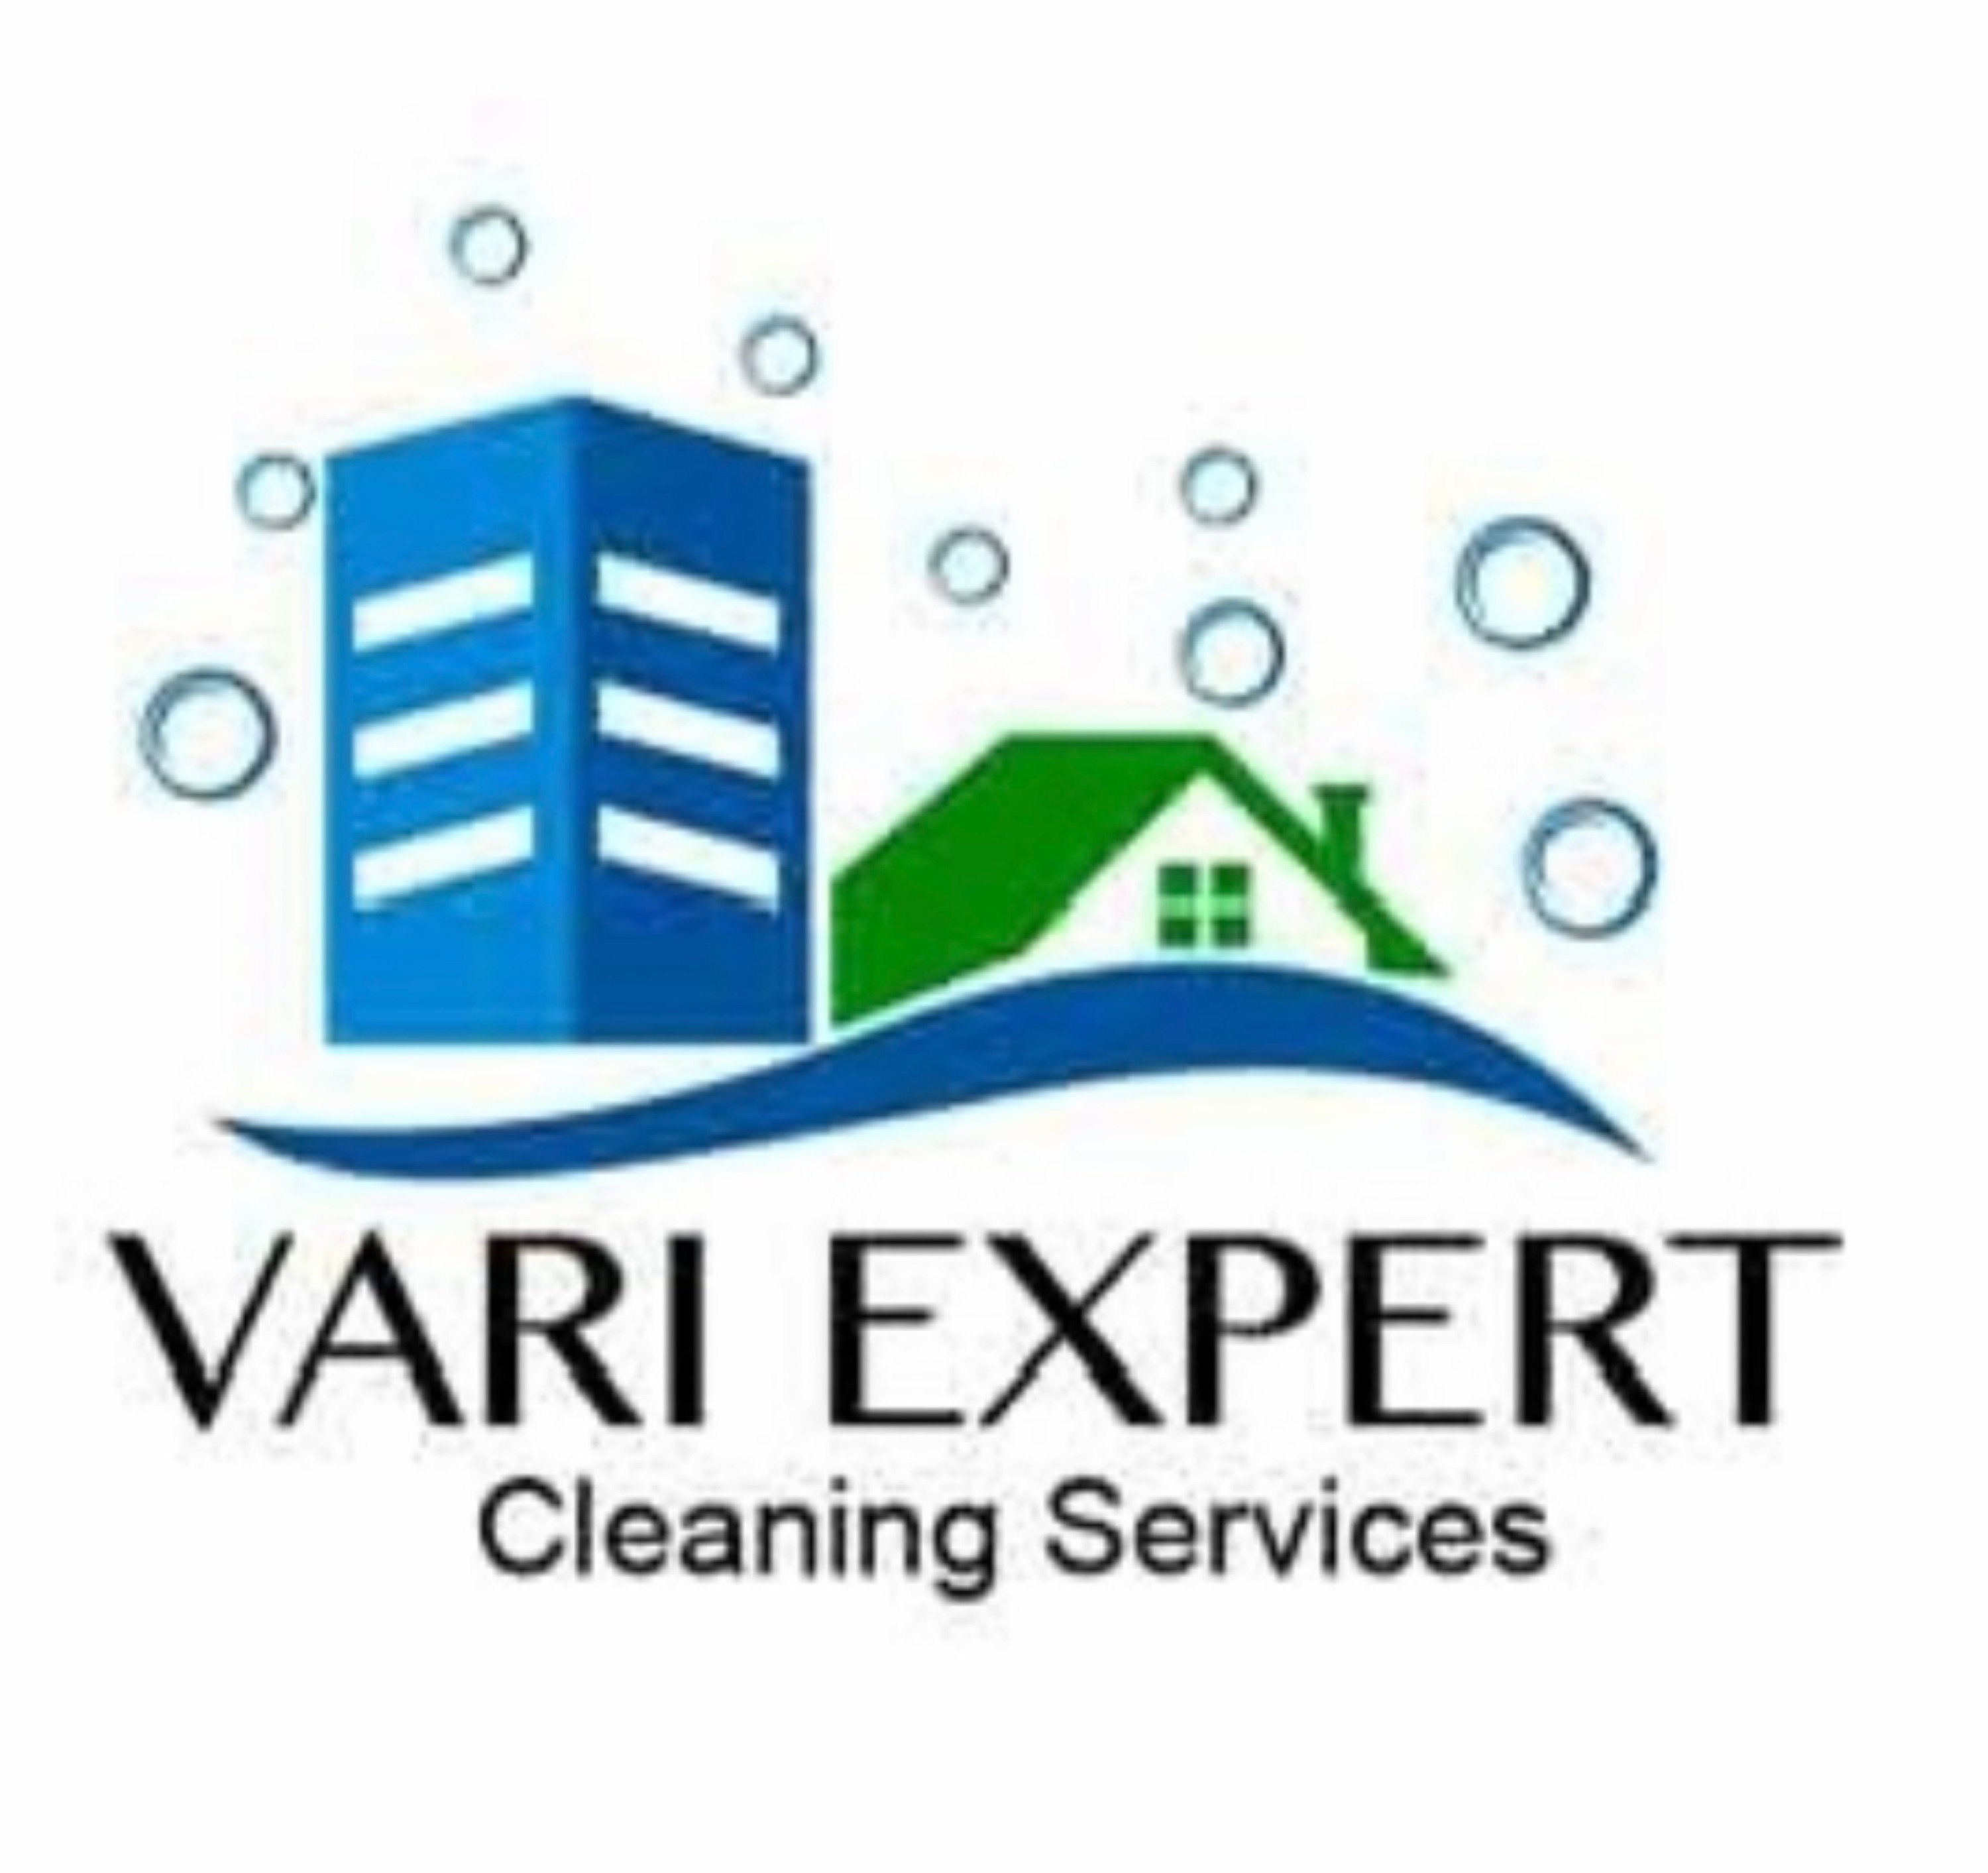 Vari Expert Cleaning Services Logo